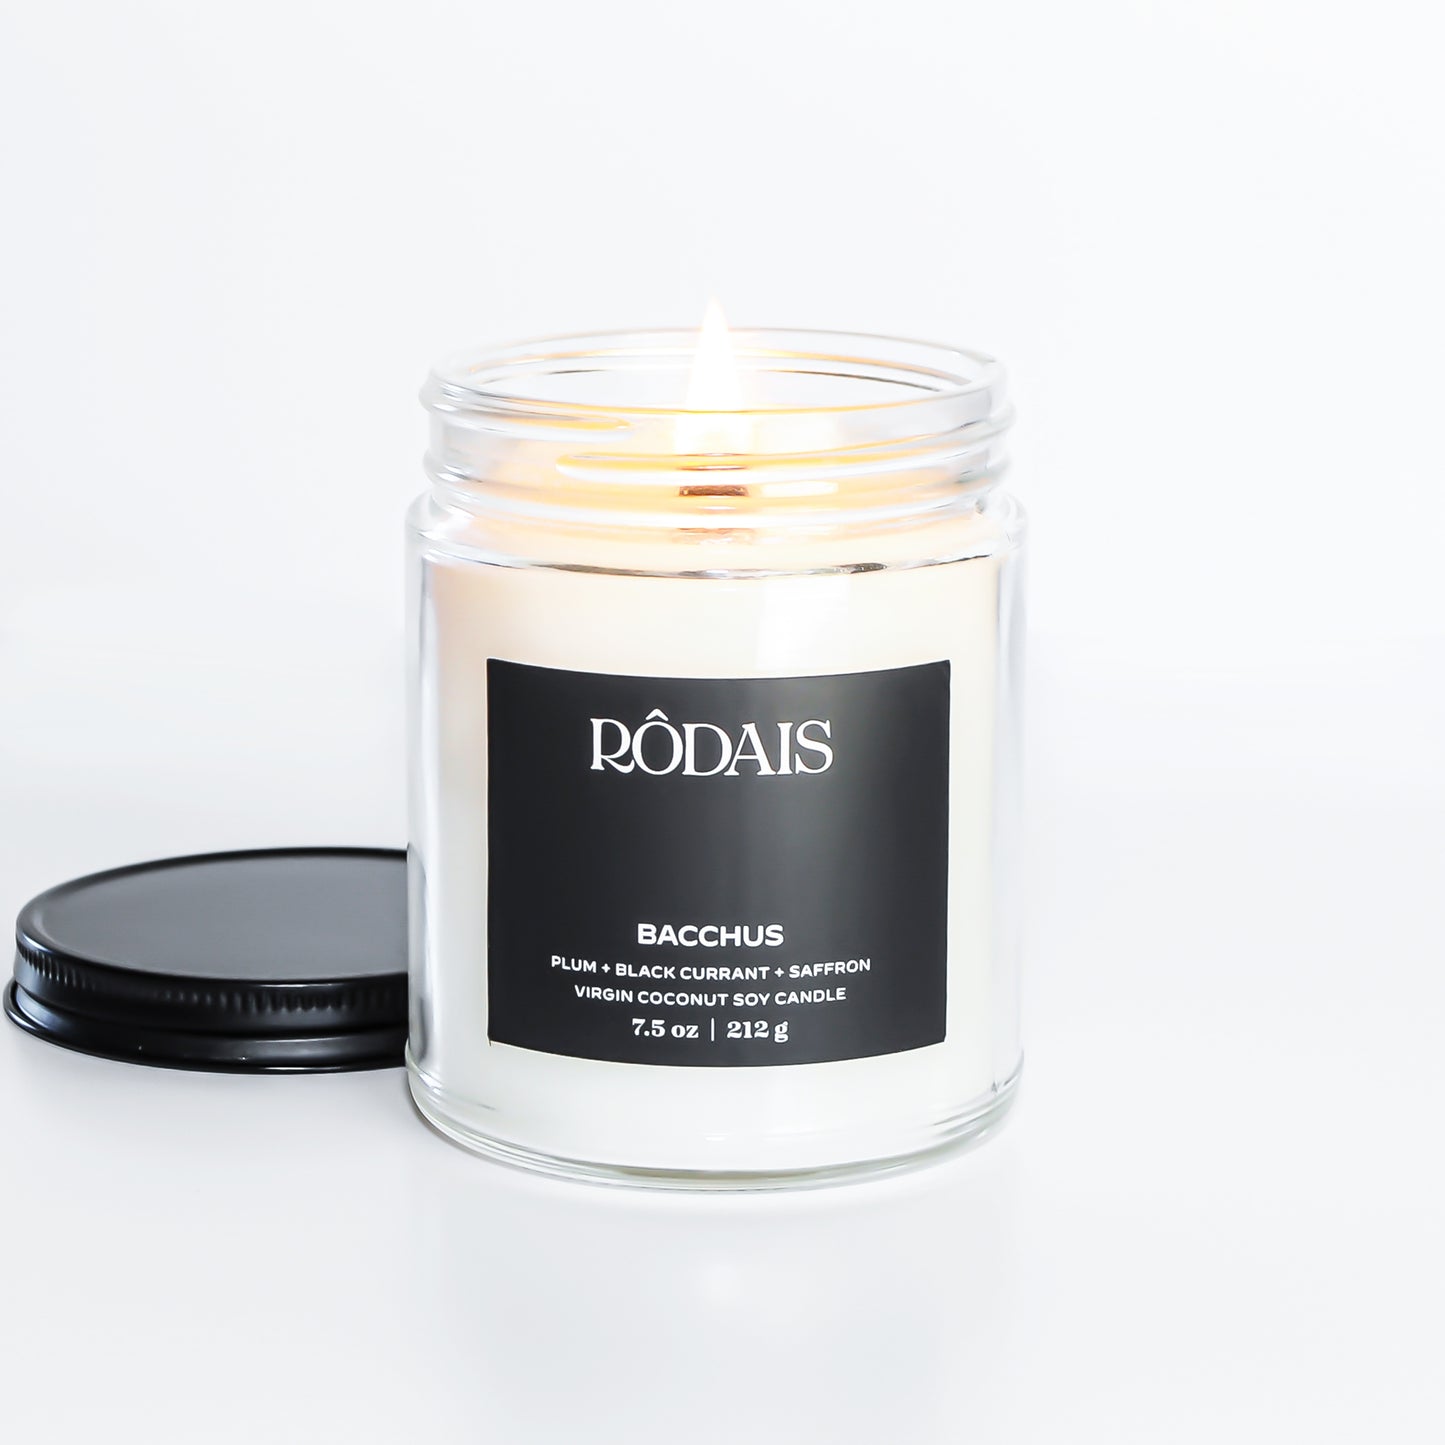 Bacchus: Wooden Wick + Virgin Coco Soy Candle